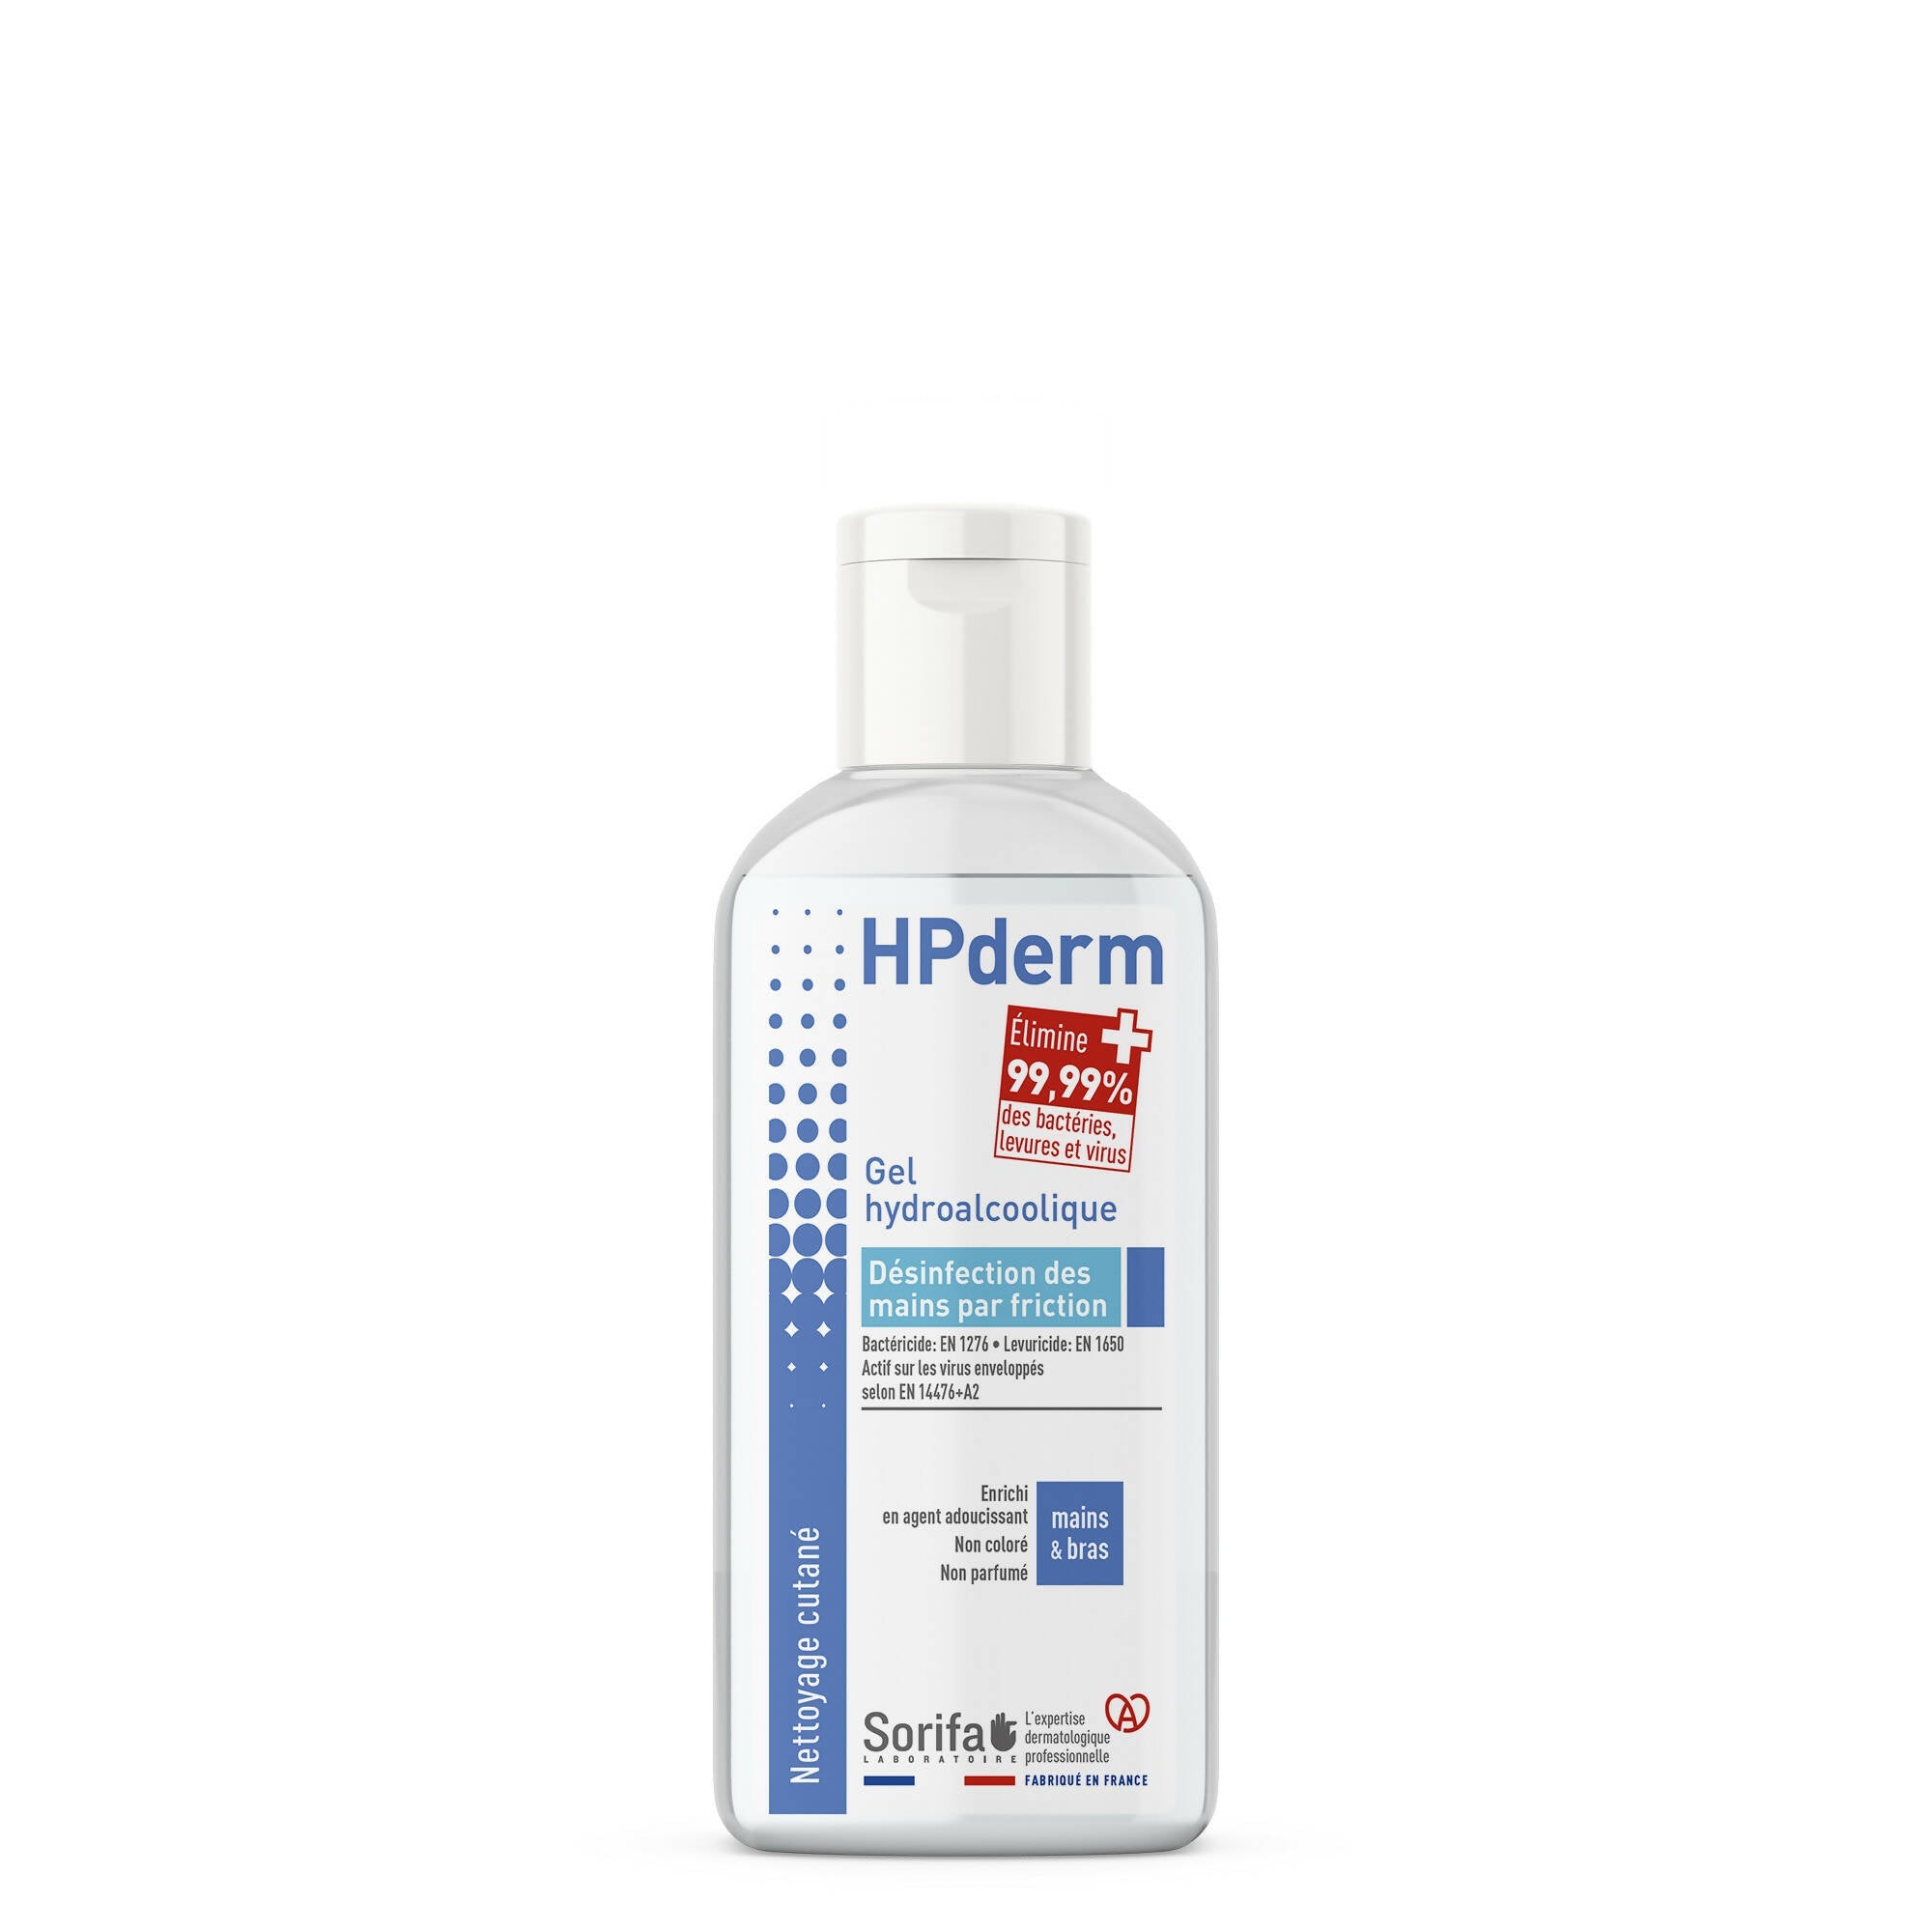 SORIFA - Pack of 5 - HPderm Hydroalcoholic gel for hand disinfection - 100 ml bottle